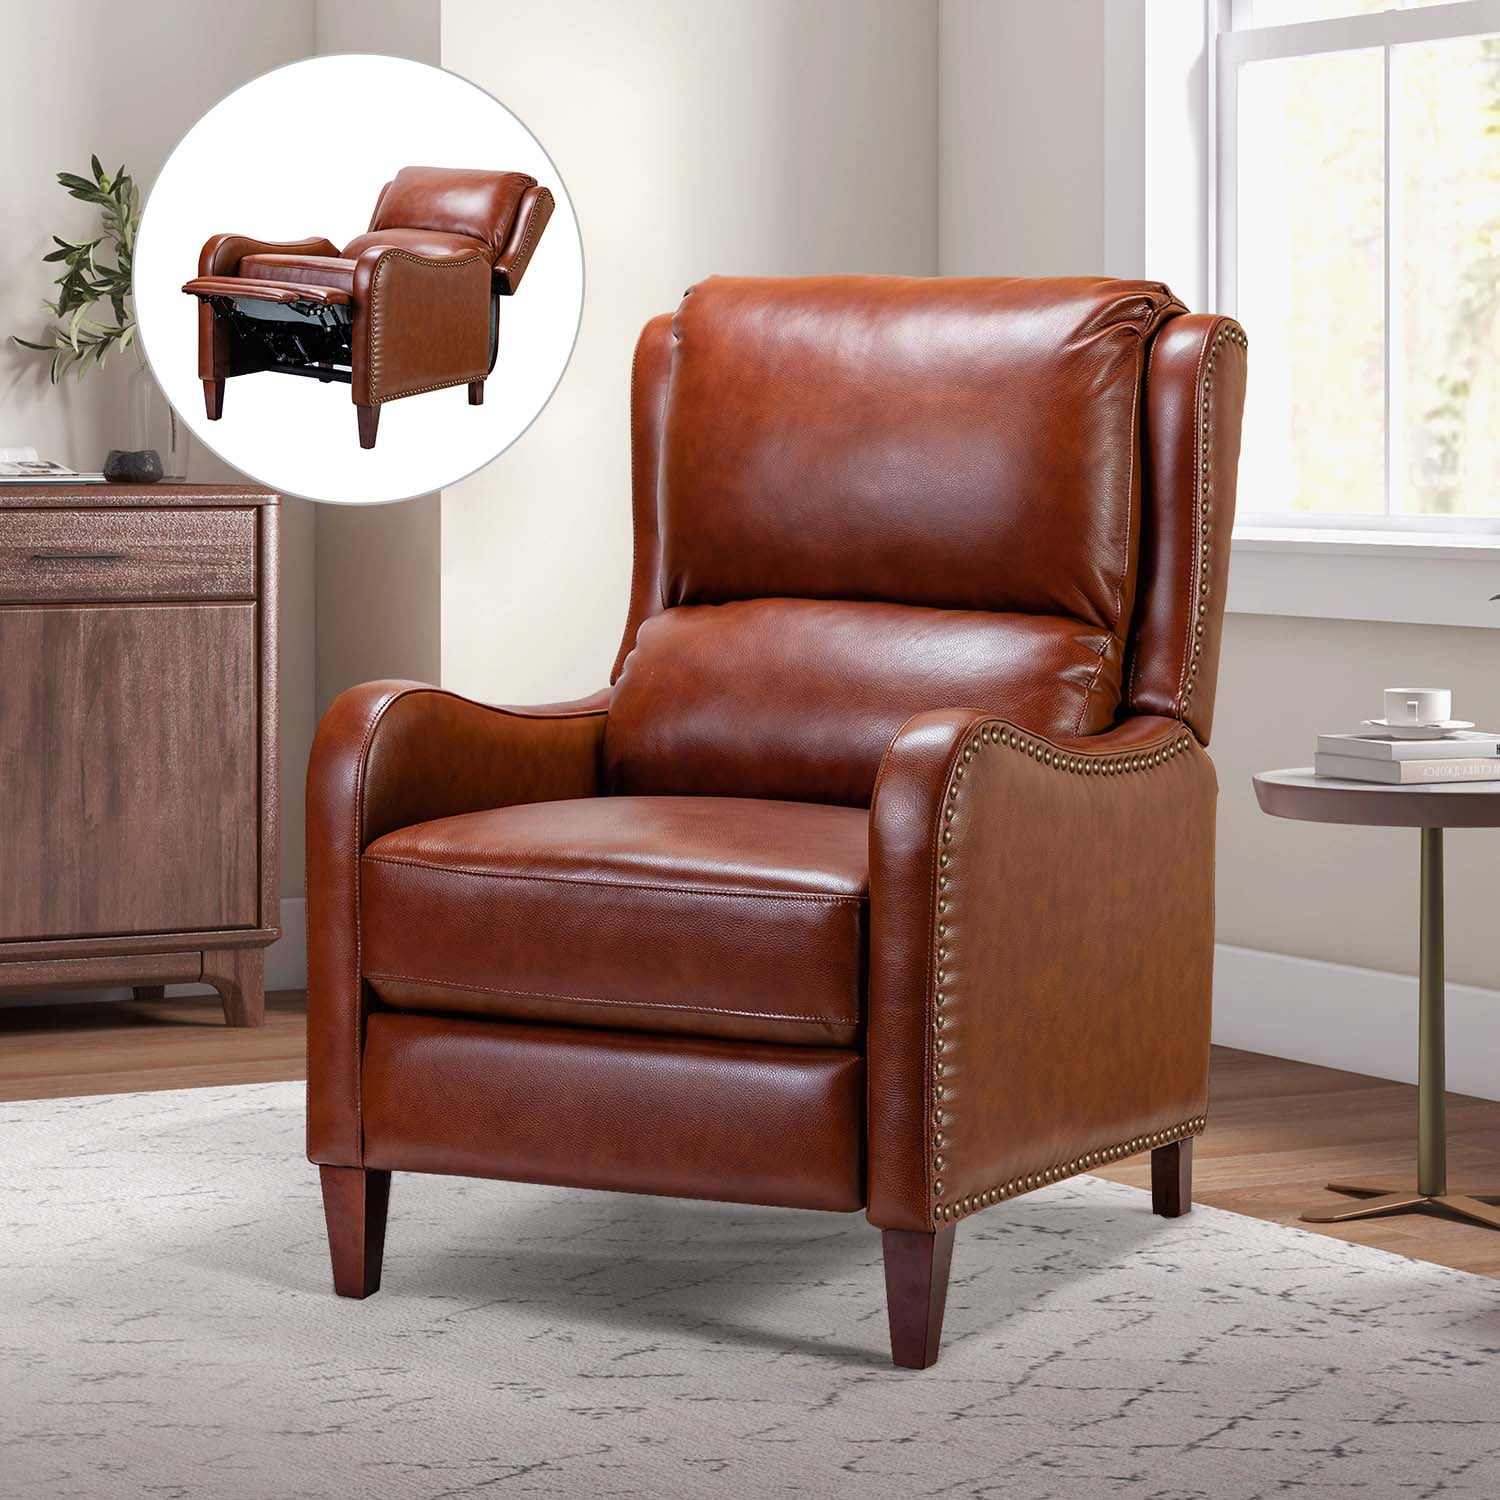 Genuine Leather Recliner Chair Push Back Upholstered Armchair Wingback  Lounge Sofa Wood Leg Home Decor Living Room Bedroom Brown